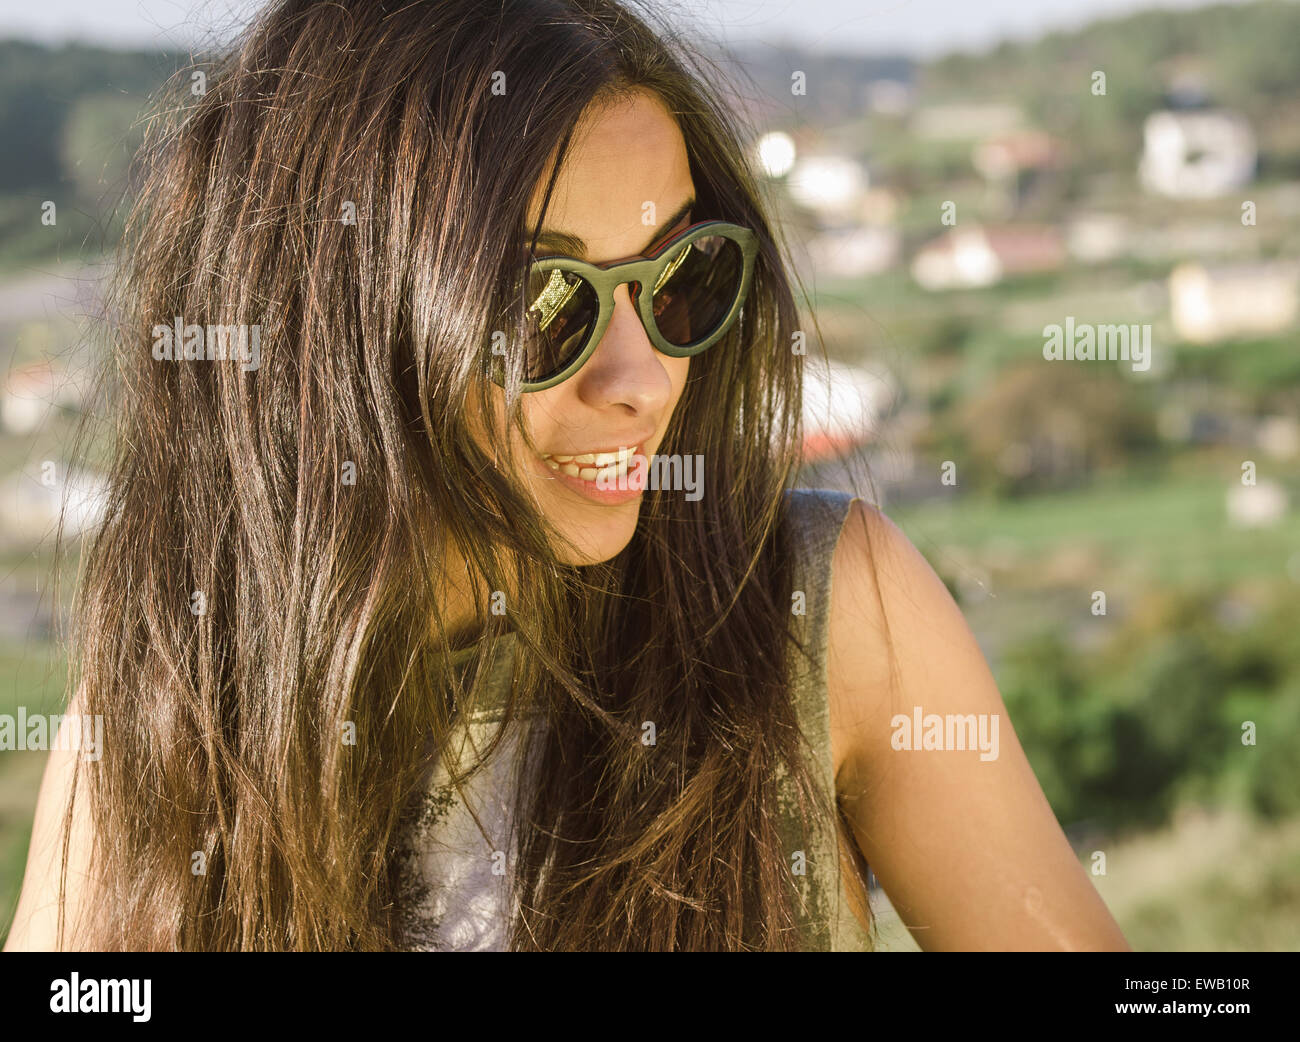 Woman with sunglasses in a portrait outdoors. Stock Photo